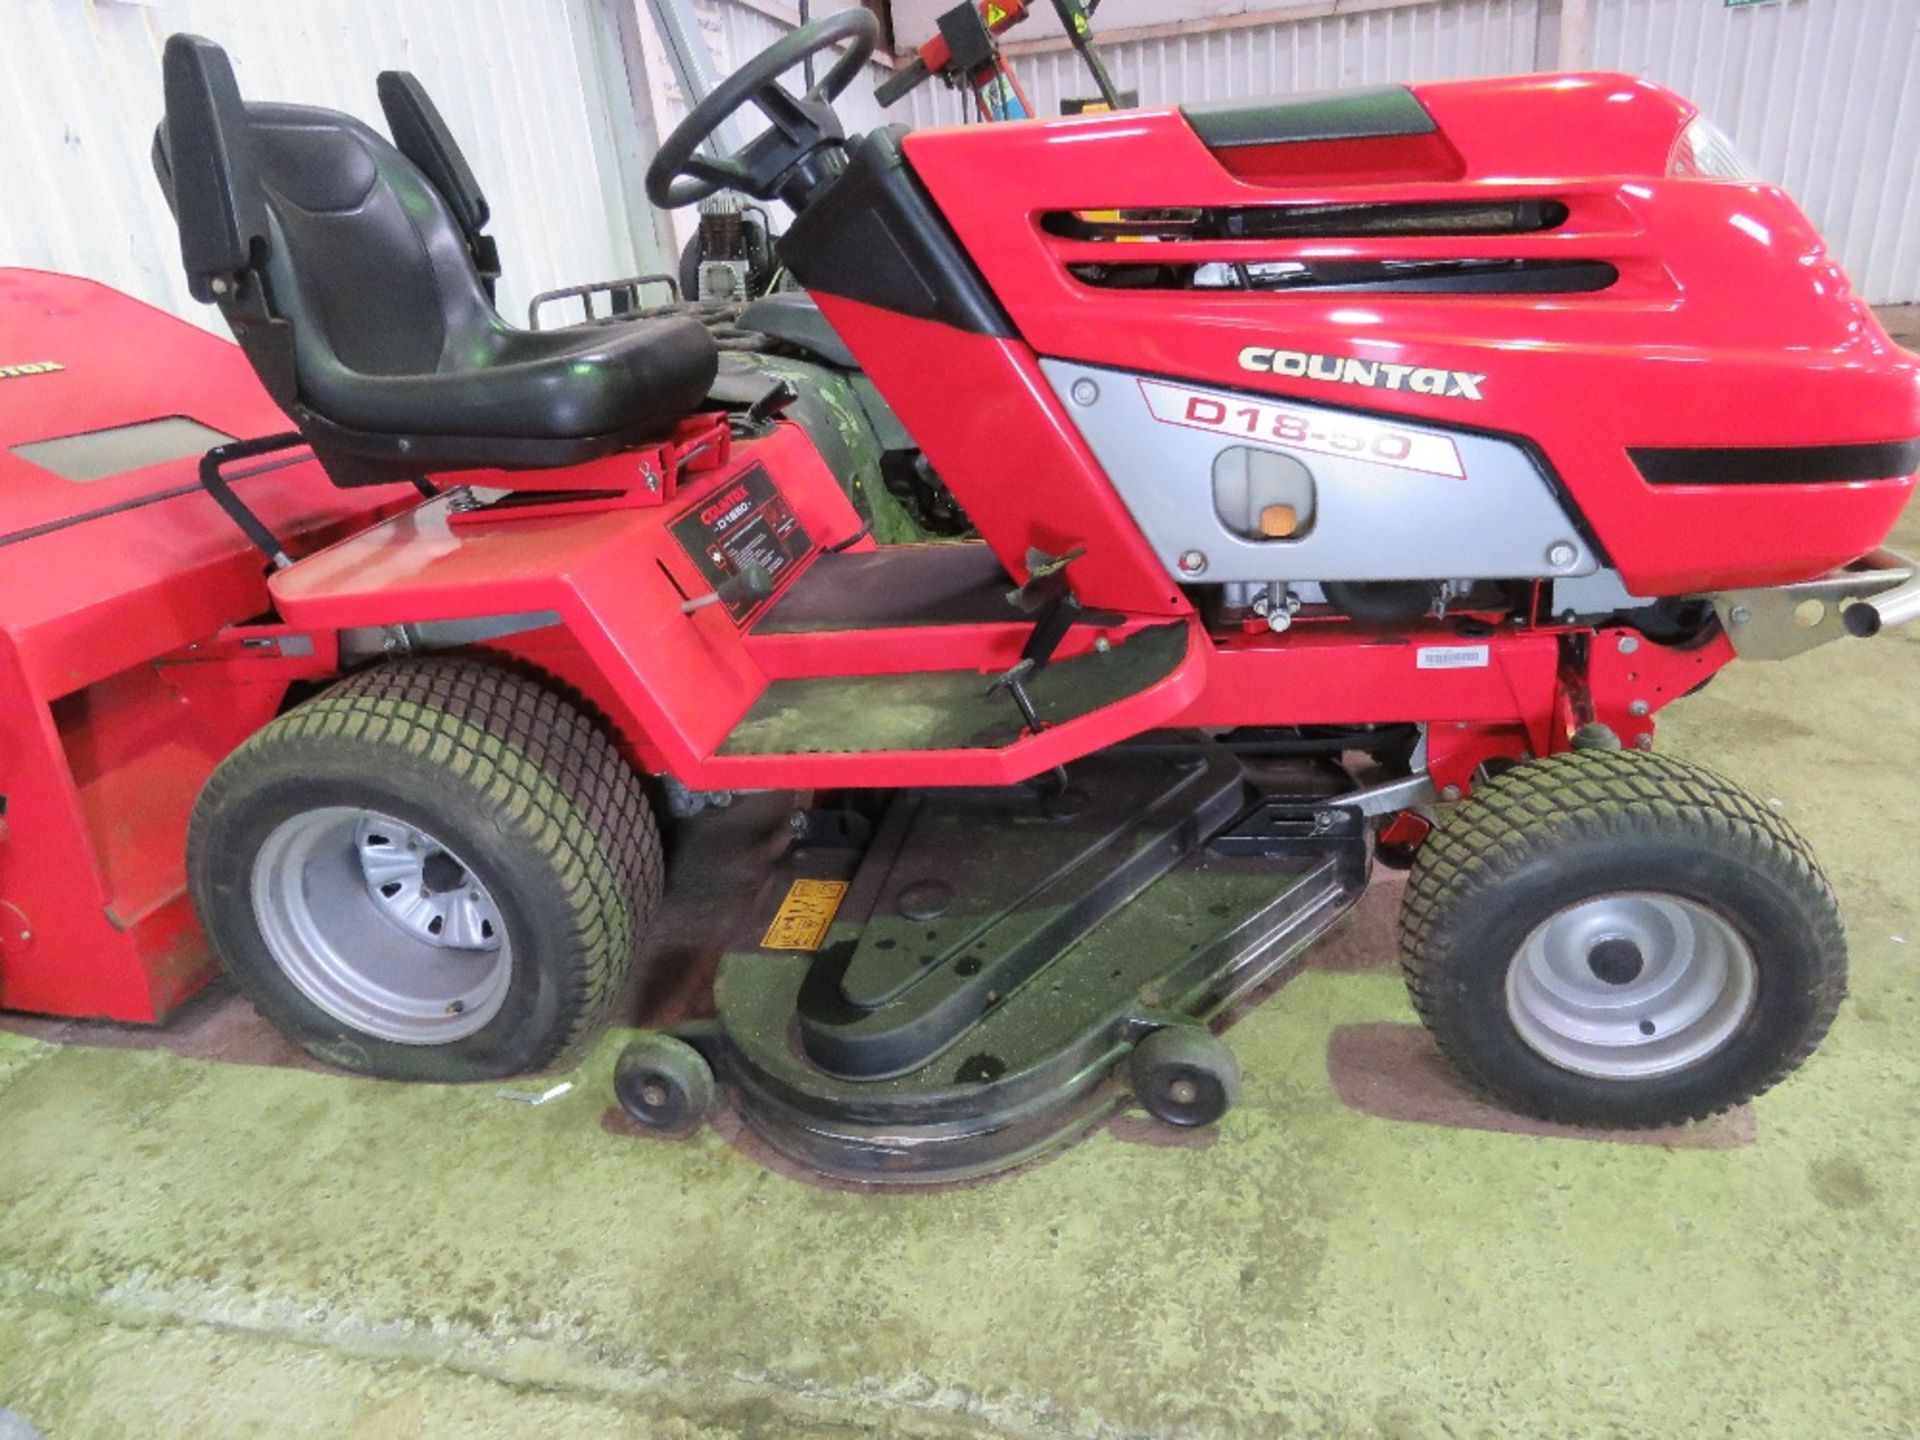 COUNTAX D1850 DIESEL ENGINED RIDE ON MOWER WITH REAR COLLECTOR AND ELECTRIC HEIGHT CONTROL. 292 REC - Image 4 of 10